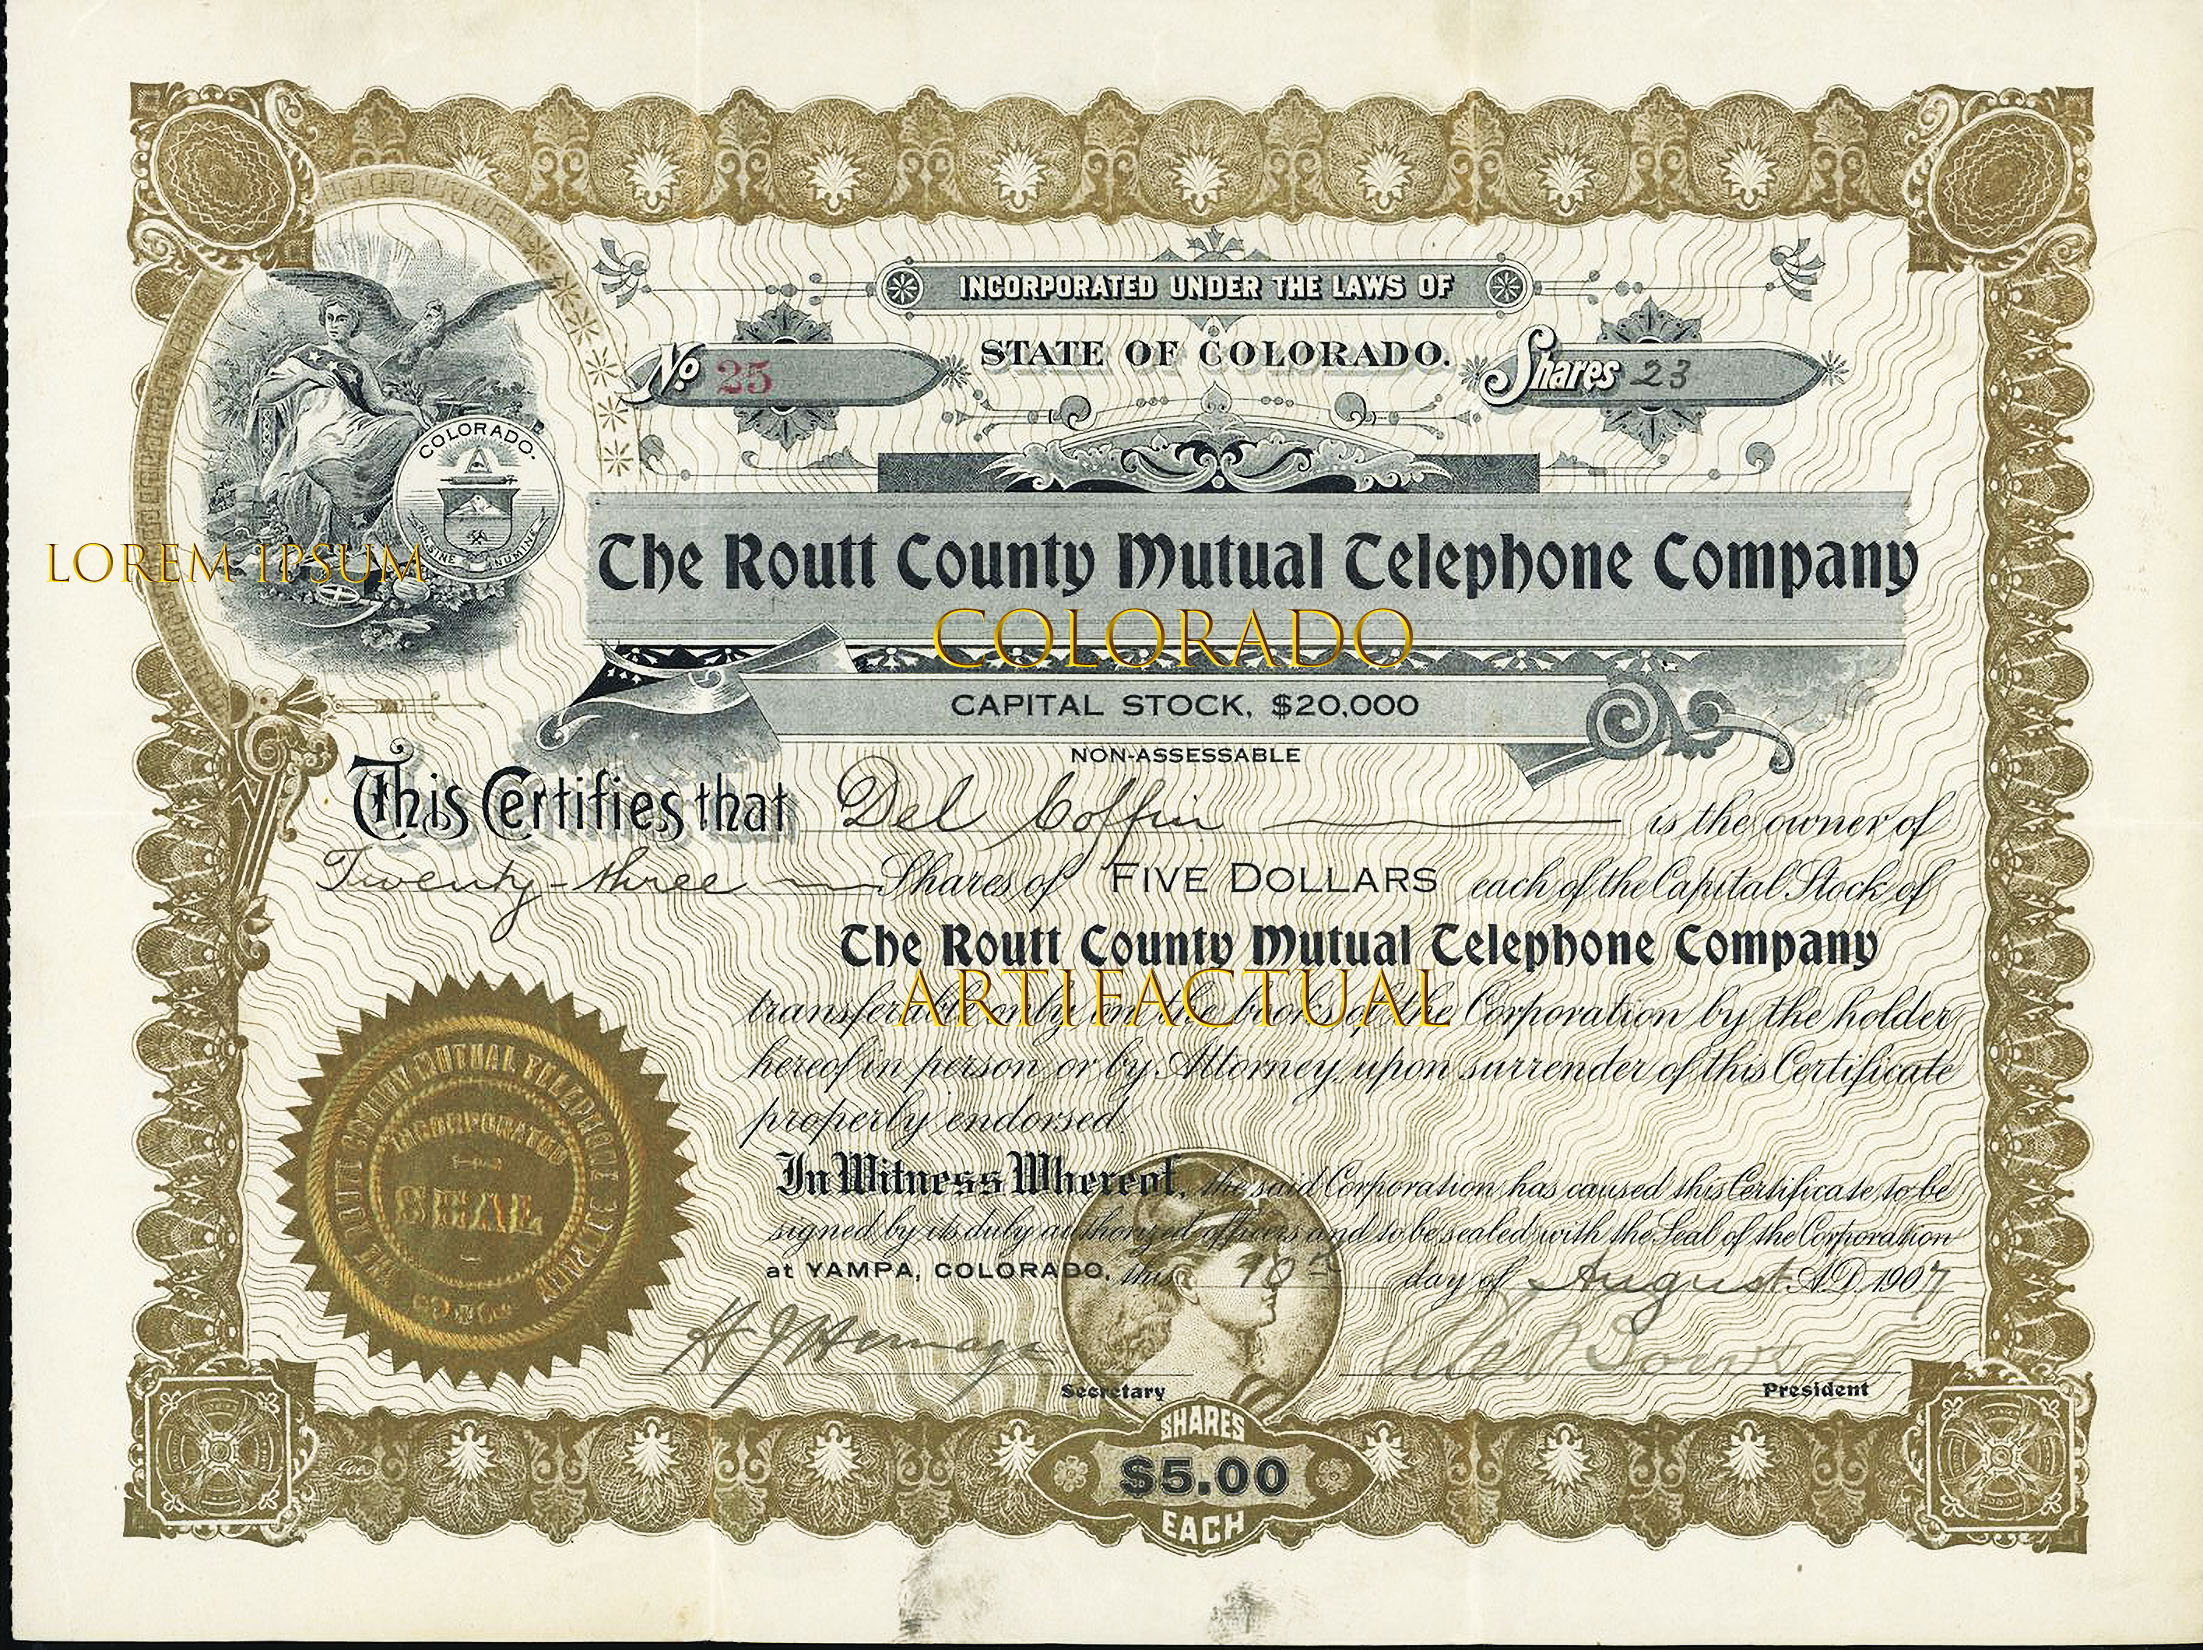 ROUTT COUNTY MUTUAL TELEPHONE COMPANY old Colorado stock certificate issued 1907